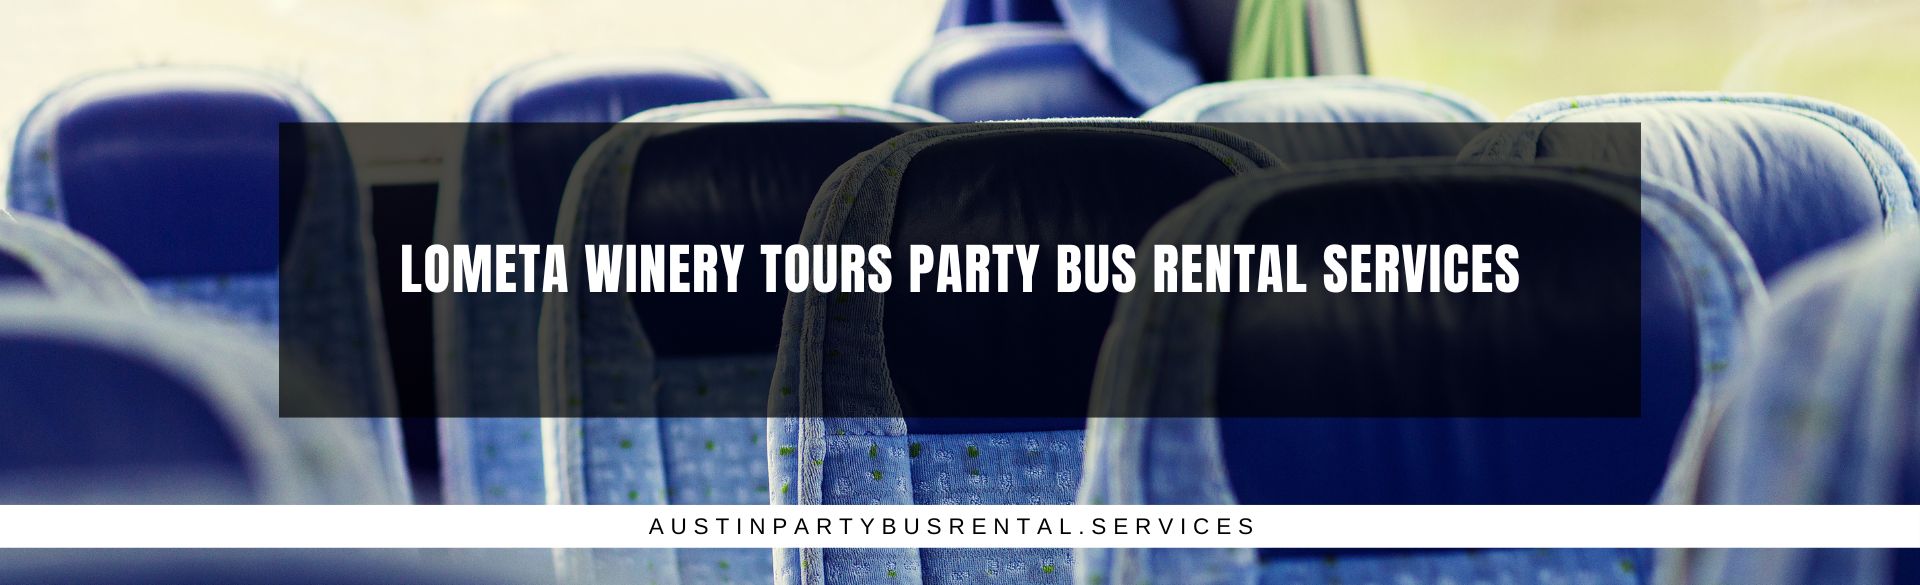 Lometa Winery Tours Party Bus Rental Services